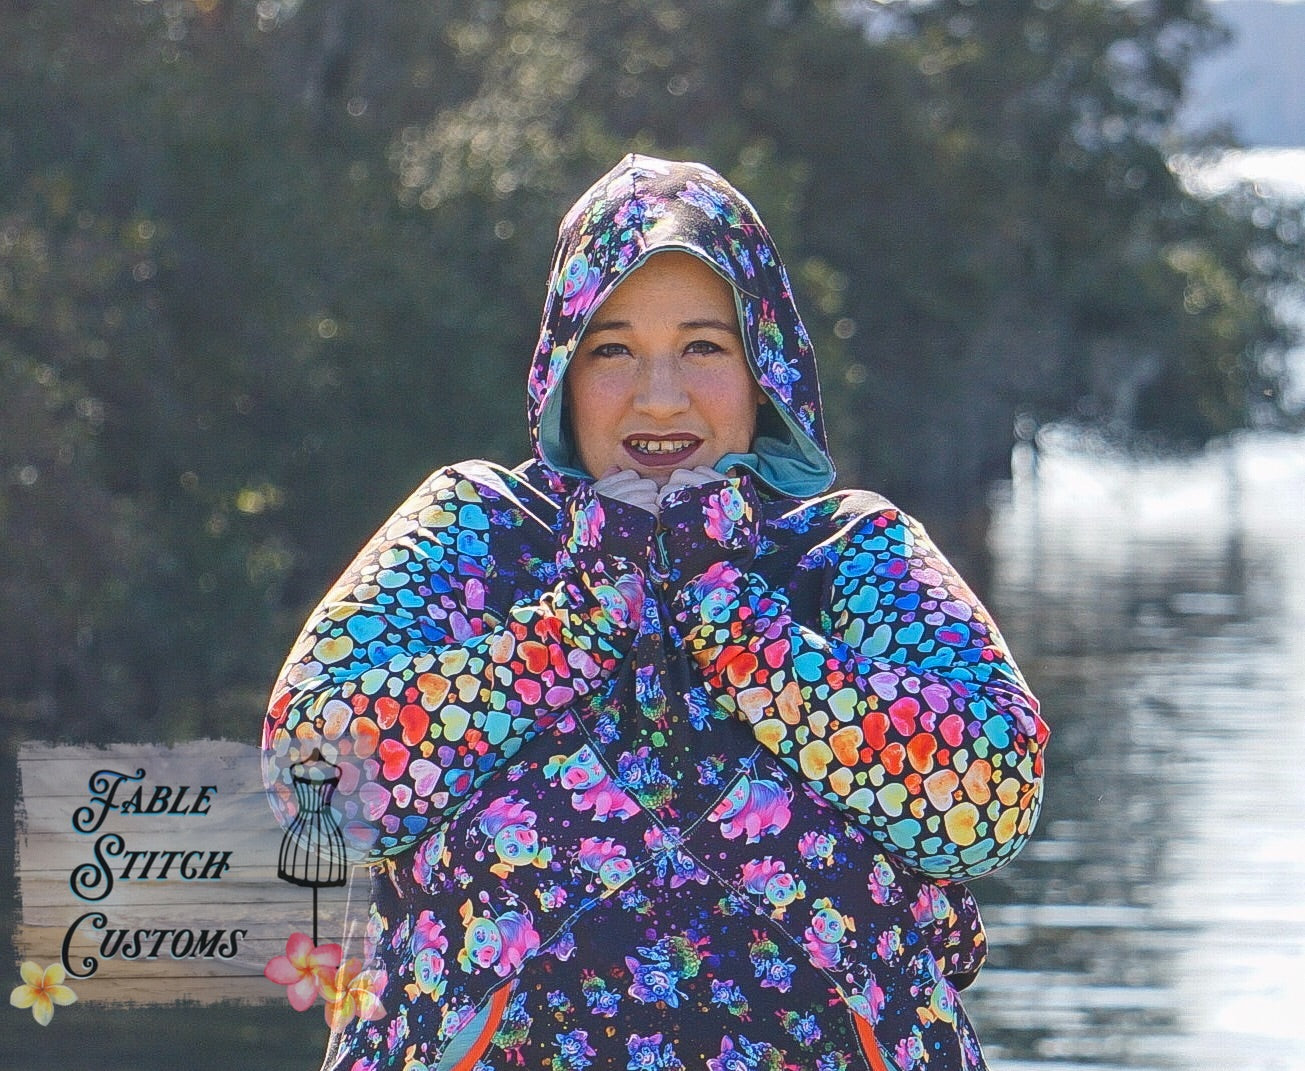 True North Hoodie for Adults - PDF Sewing Pattern - PROJECTOR/A0 File included